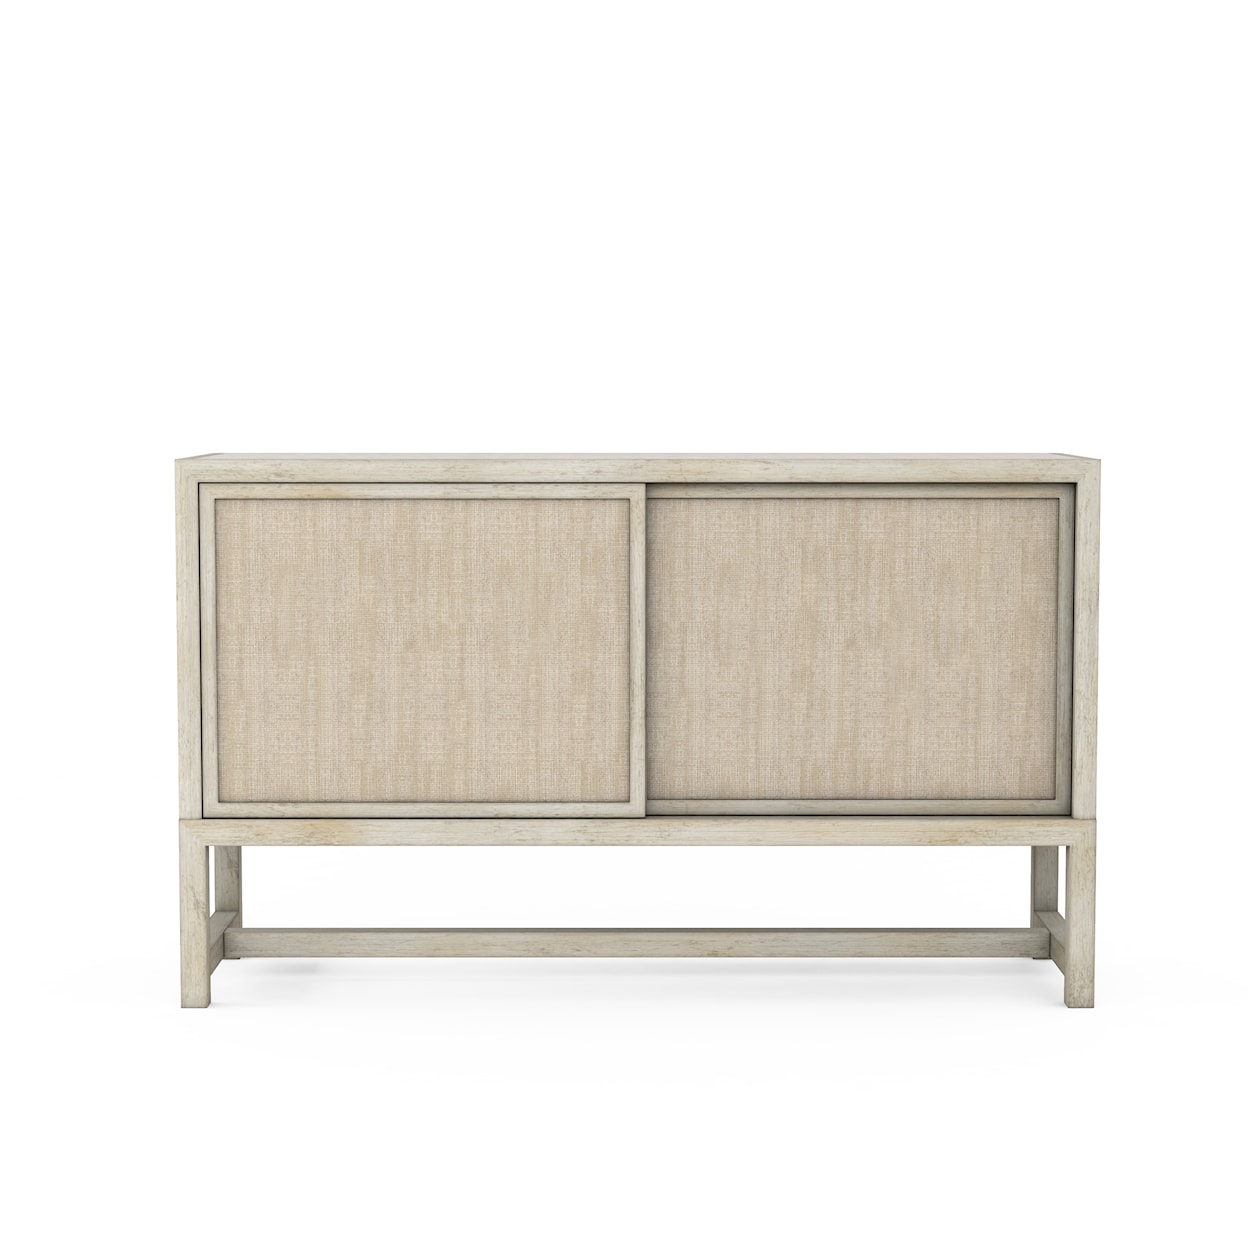 A.R.T. Furniture Inc Cotiere Sideboard 